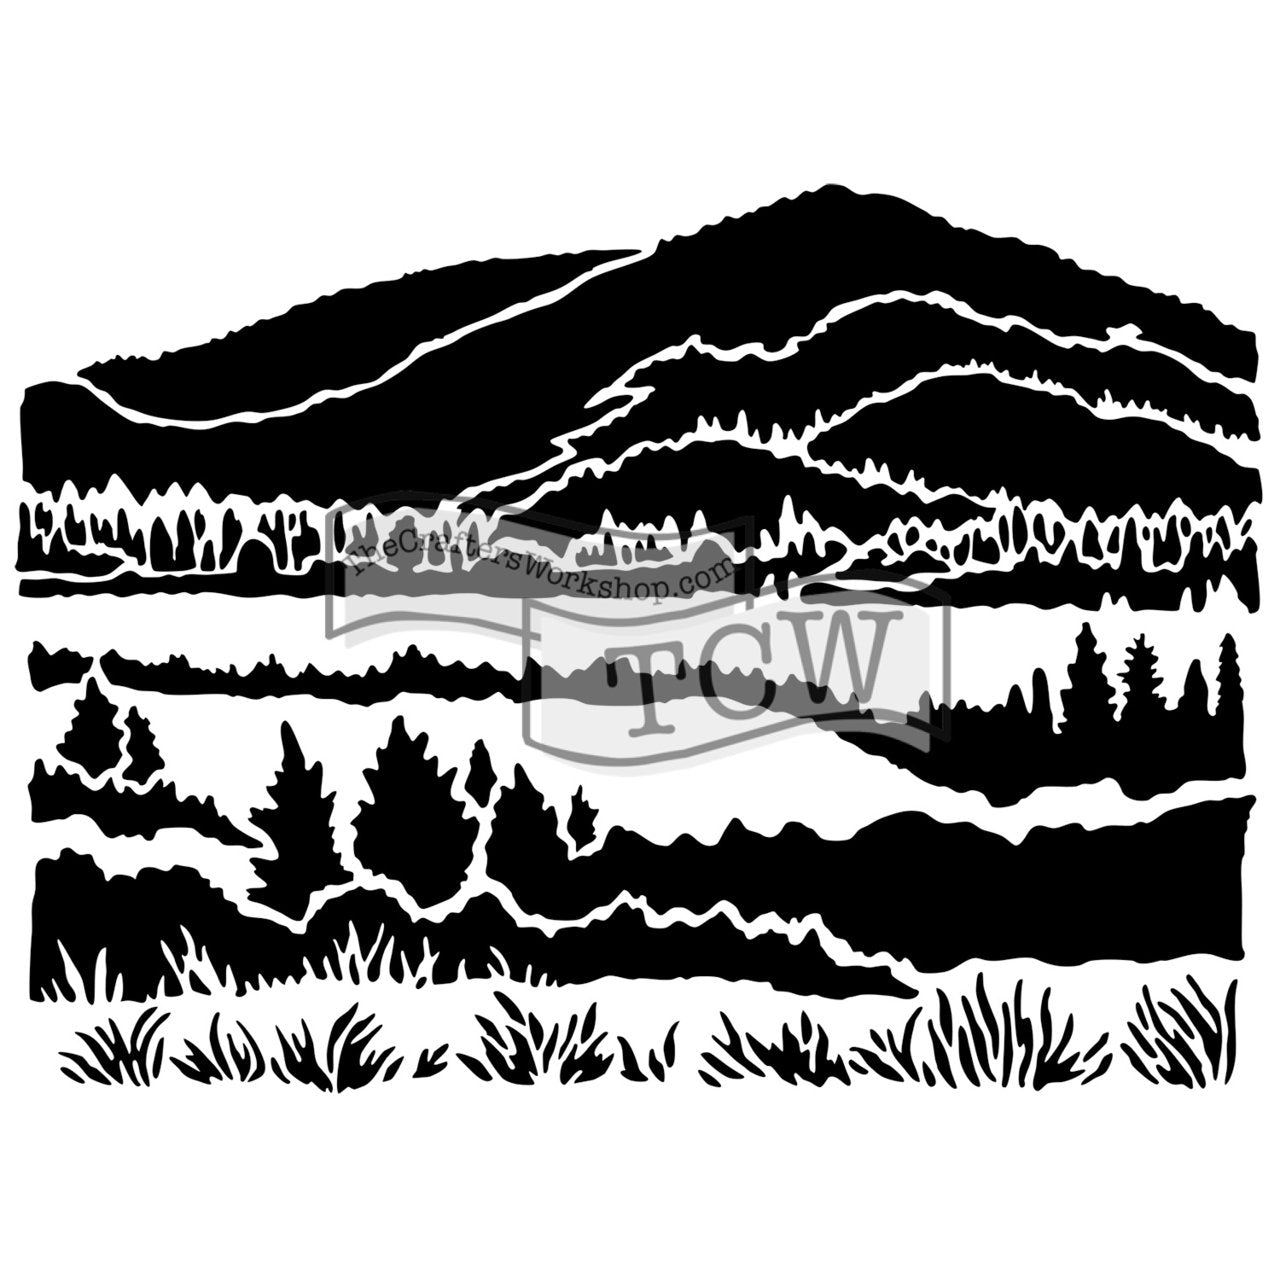 Crafters Workshop Stencil 6X6 - Mountain View - merriartist.com